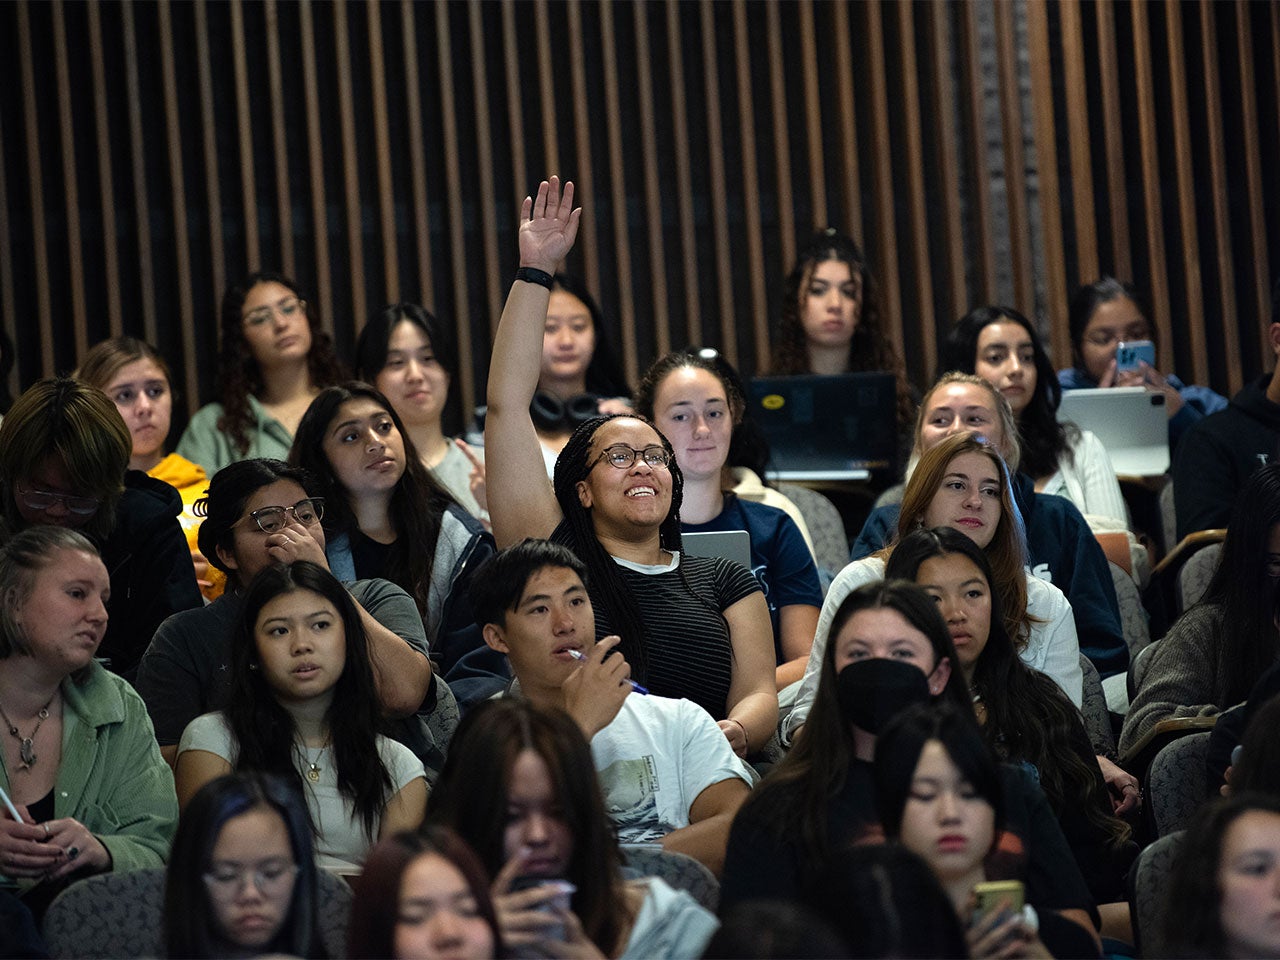 A UC Davis student raises their hand during a class session.